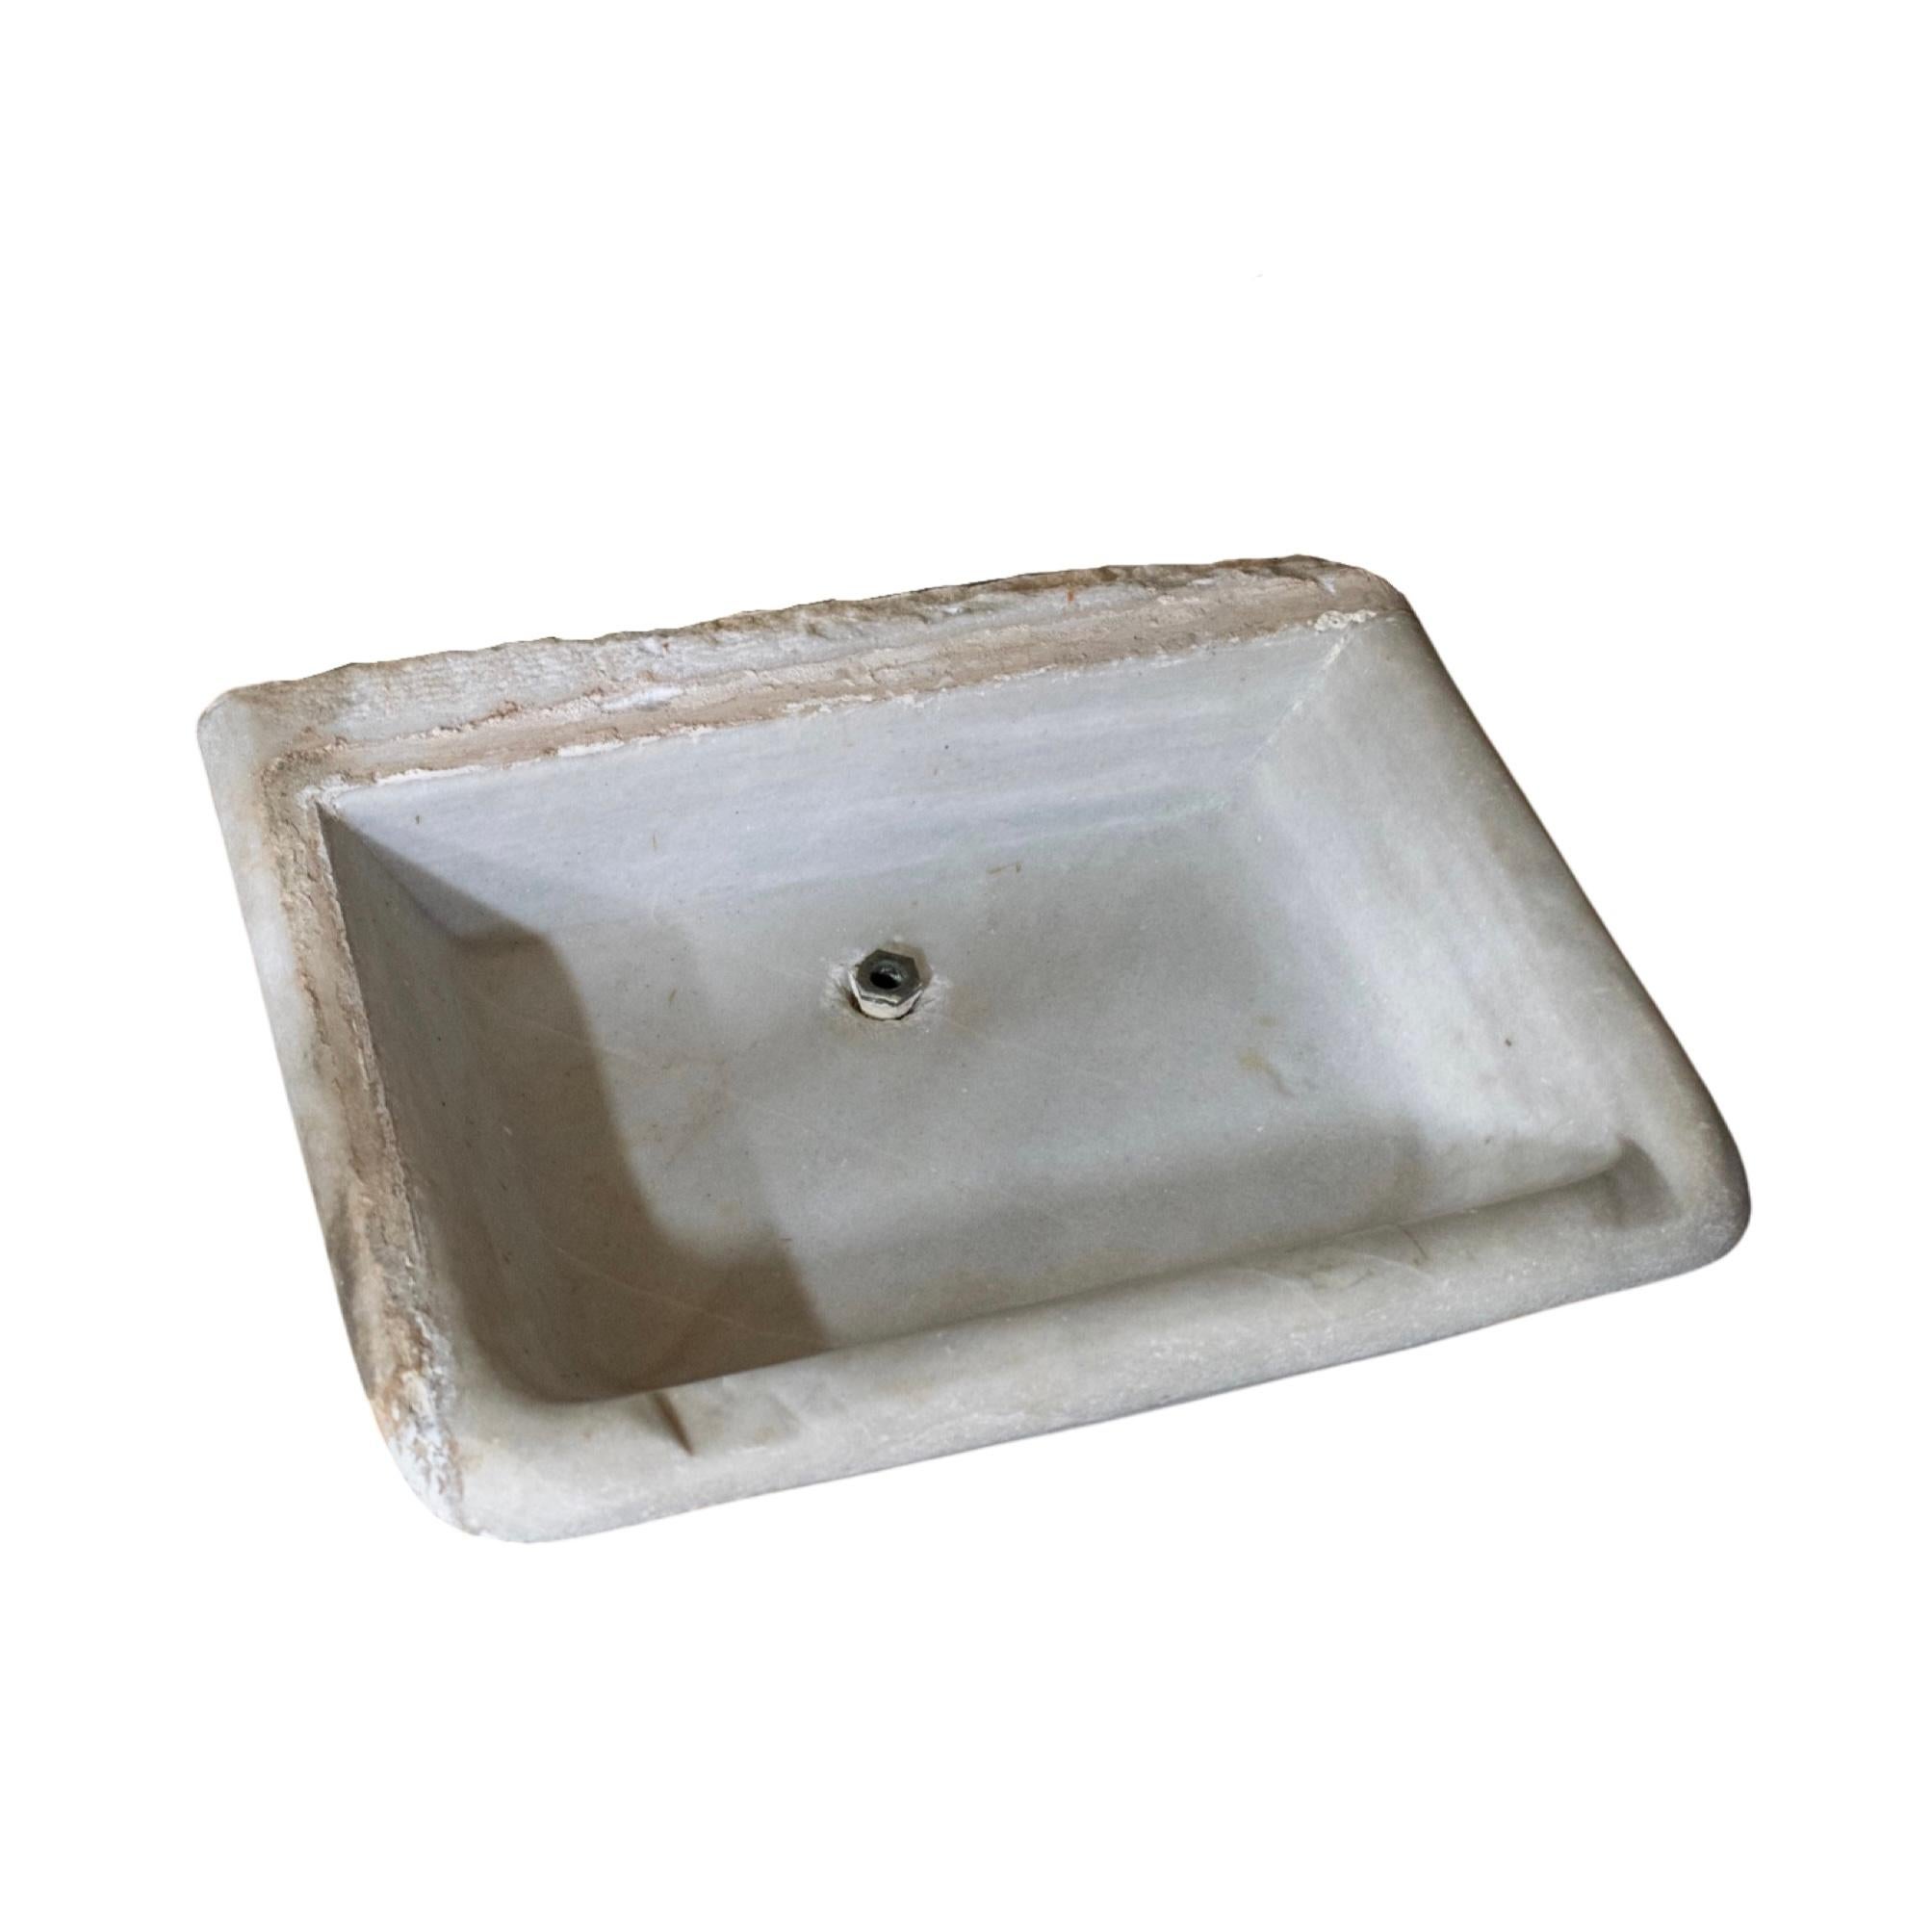 Small sink made out of white Marble stone. Originates from France. Circa, 19th c.